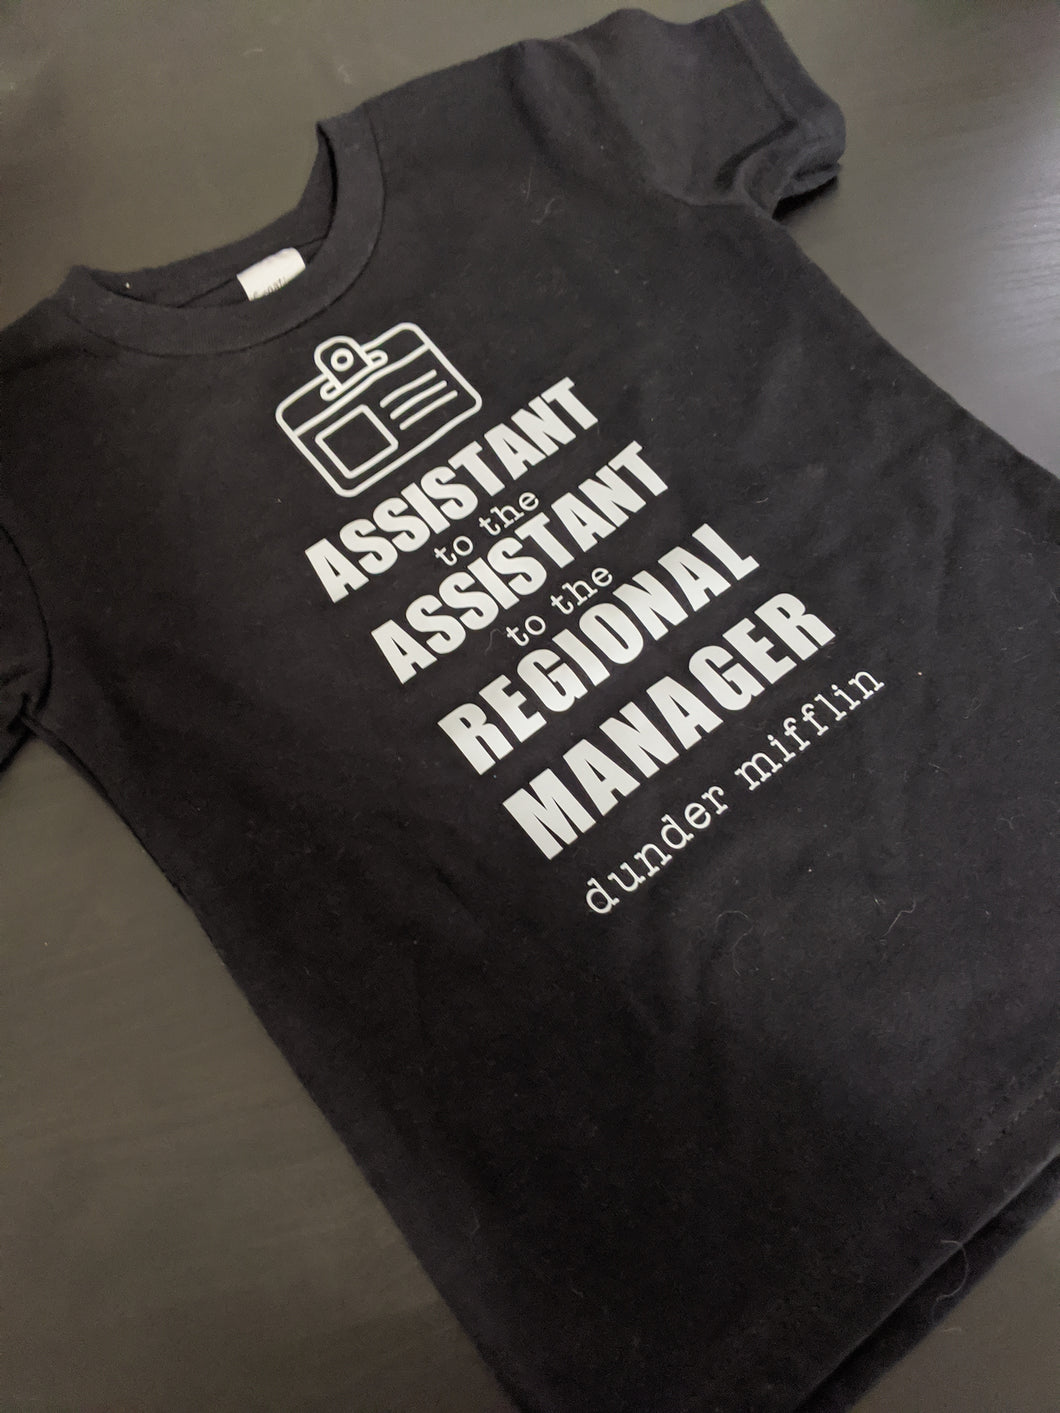 CLEARANCE The Office inspired Asst to the Asst to the Regional Manager Shirt